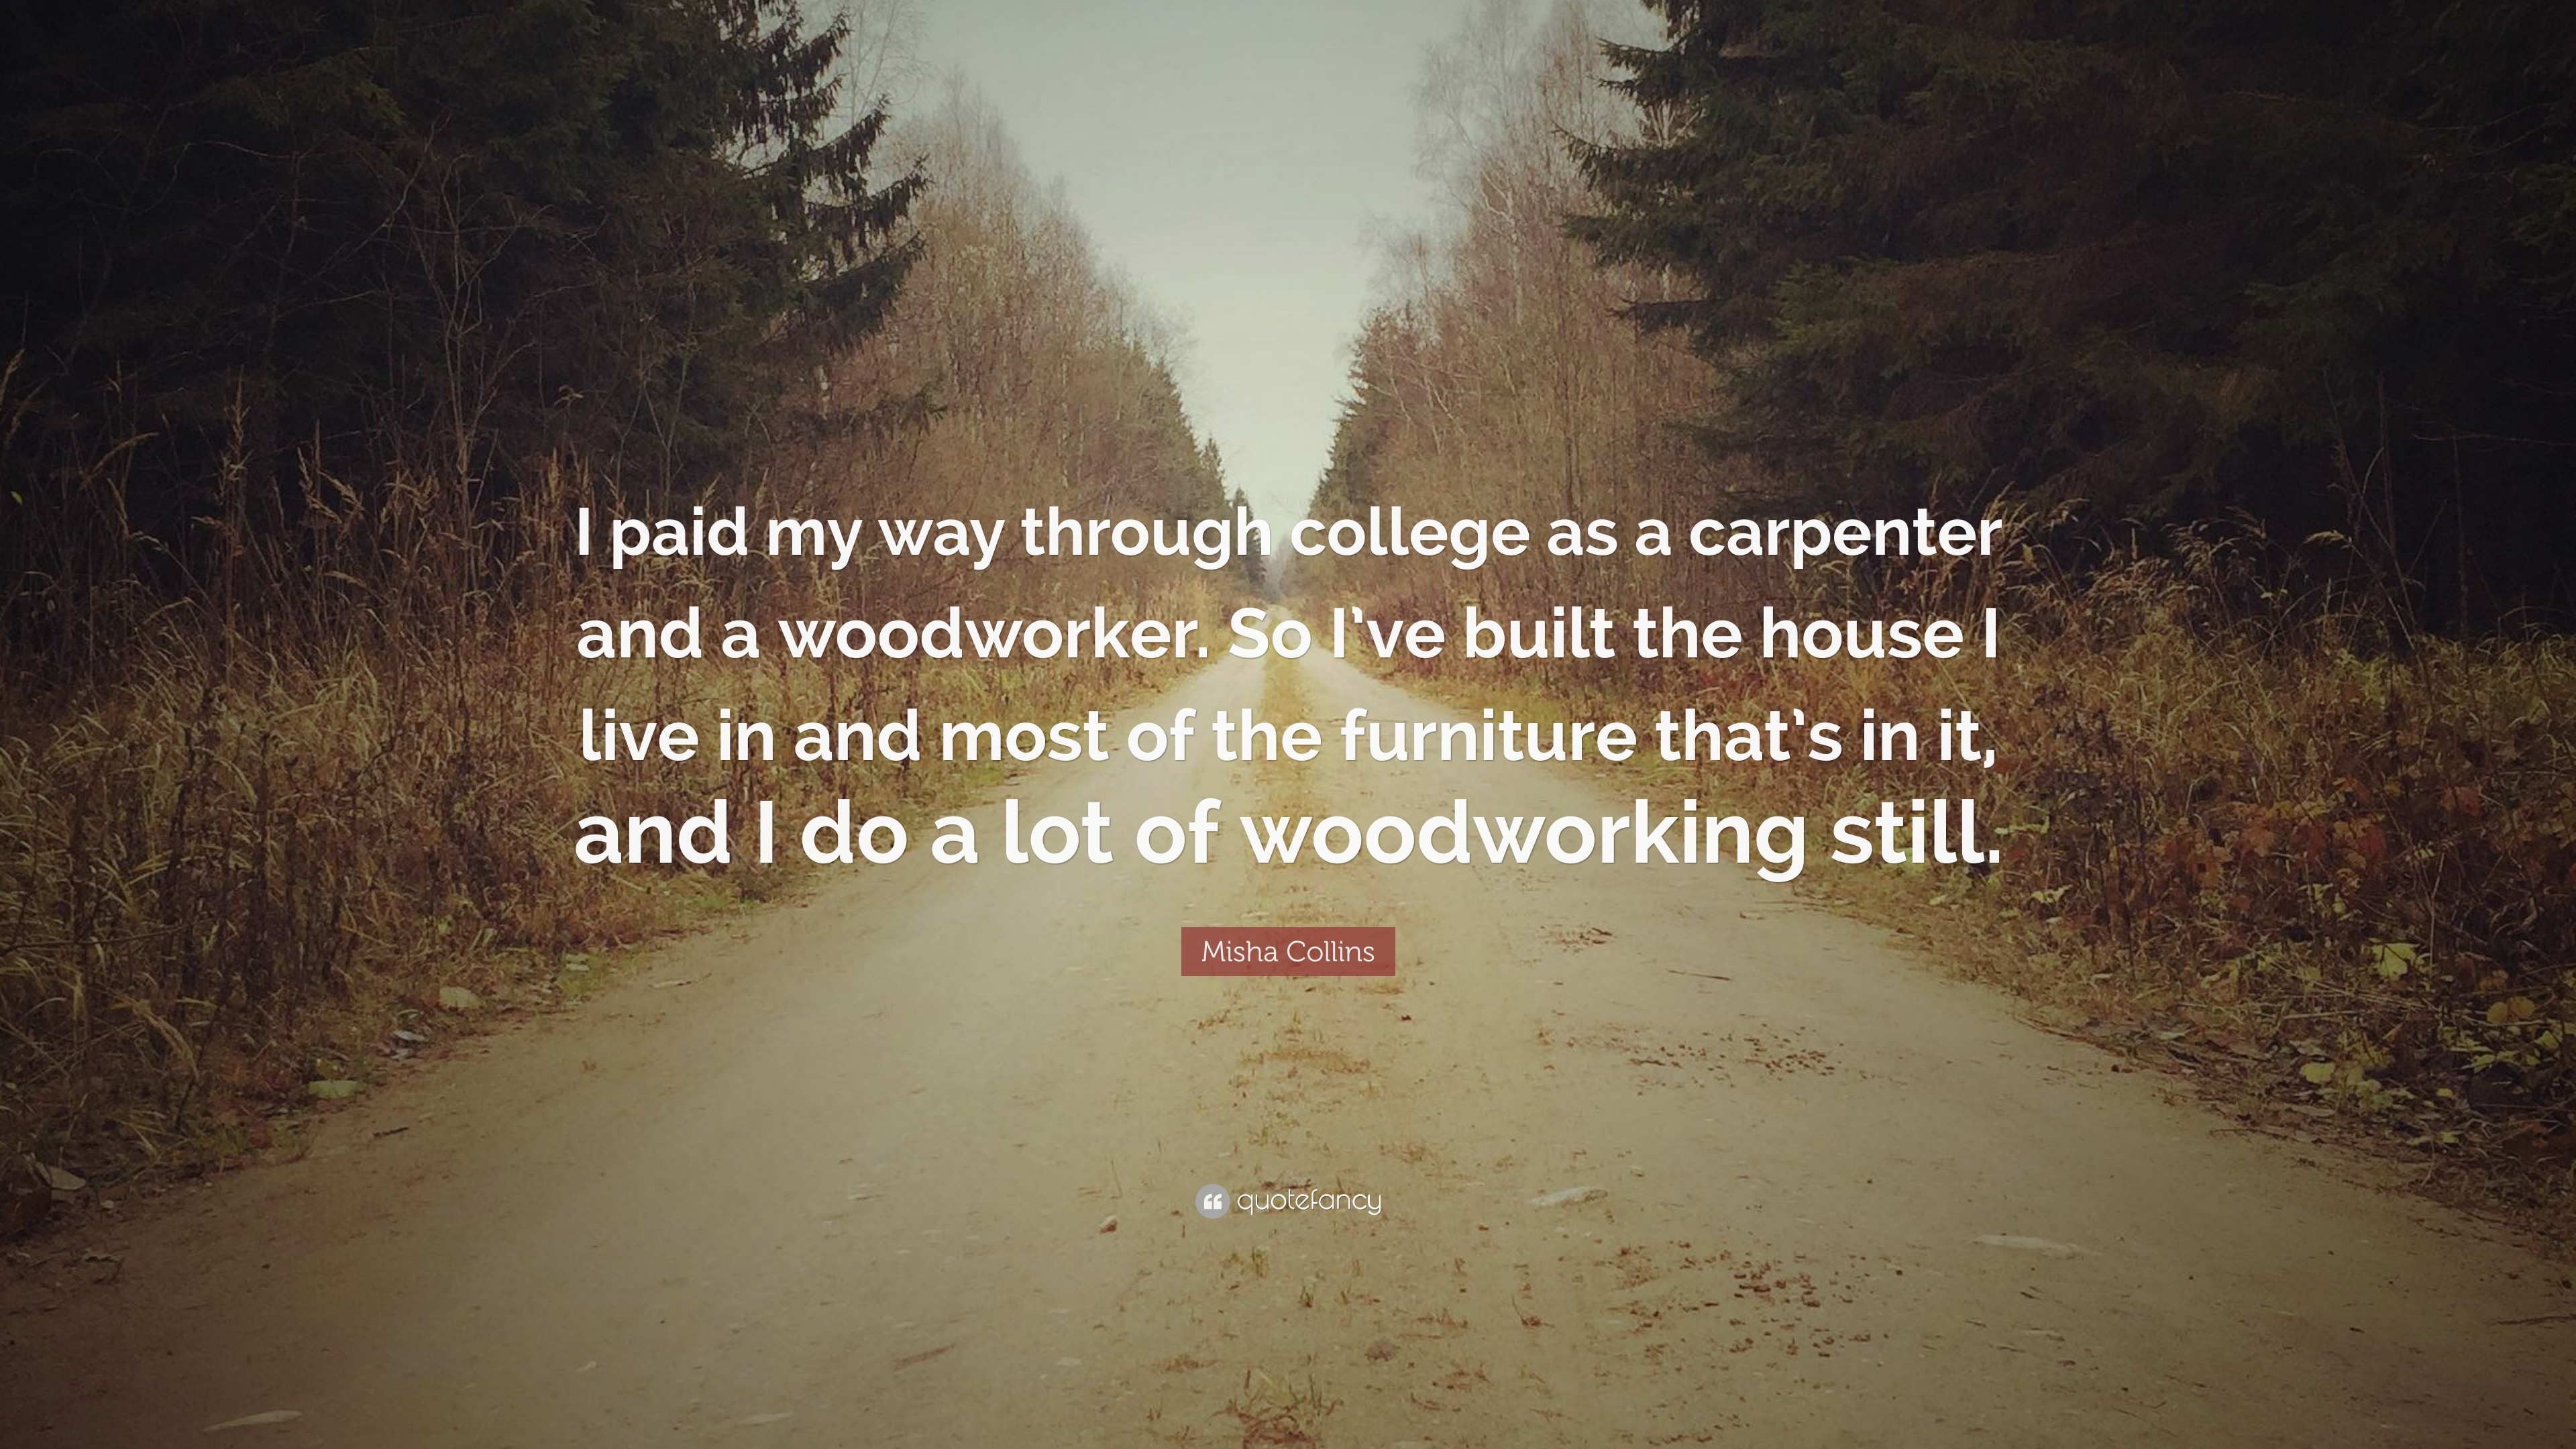 3840x2160 Misha Collins Quote: “I paid my way through college as a carpenter and a